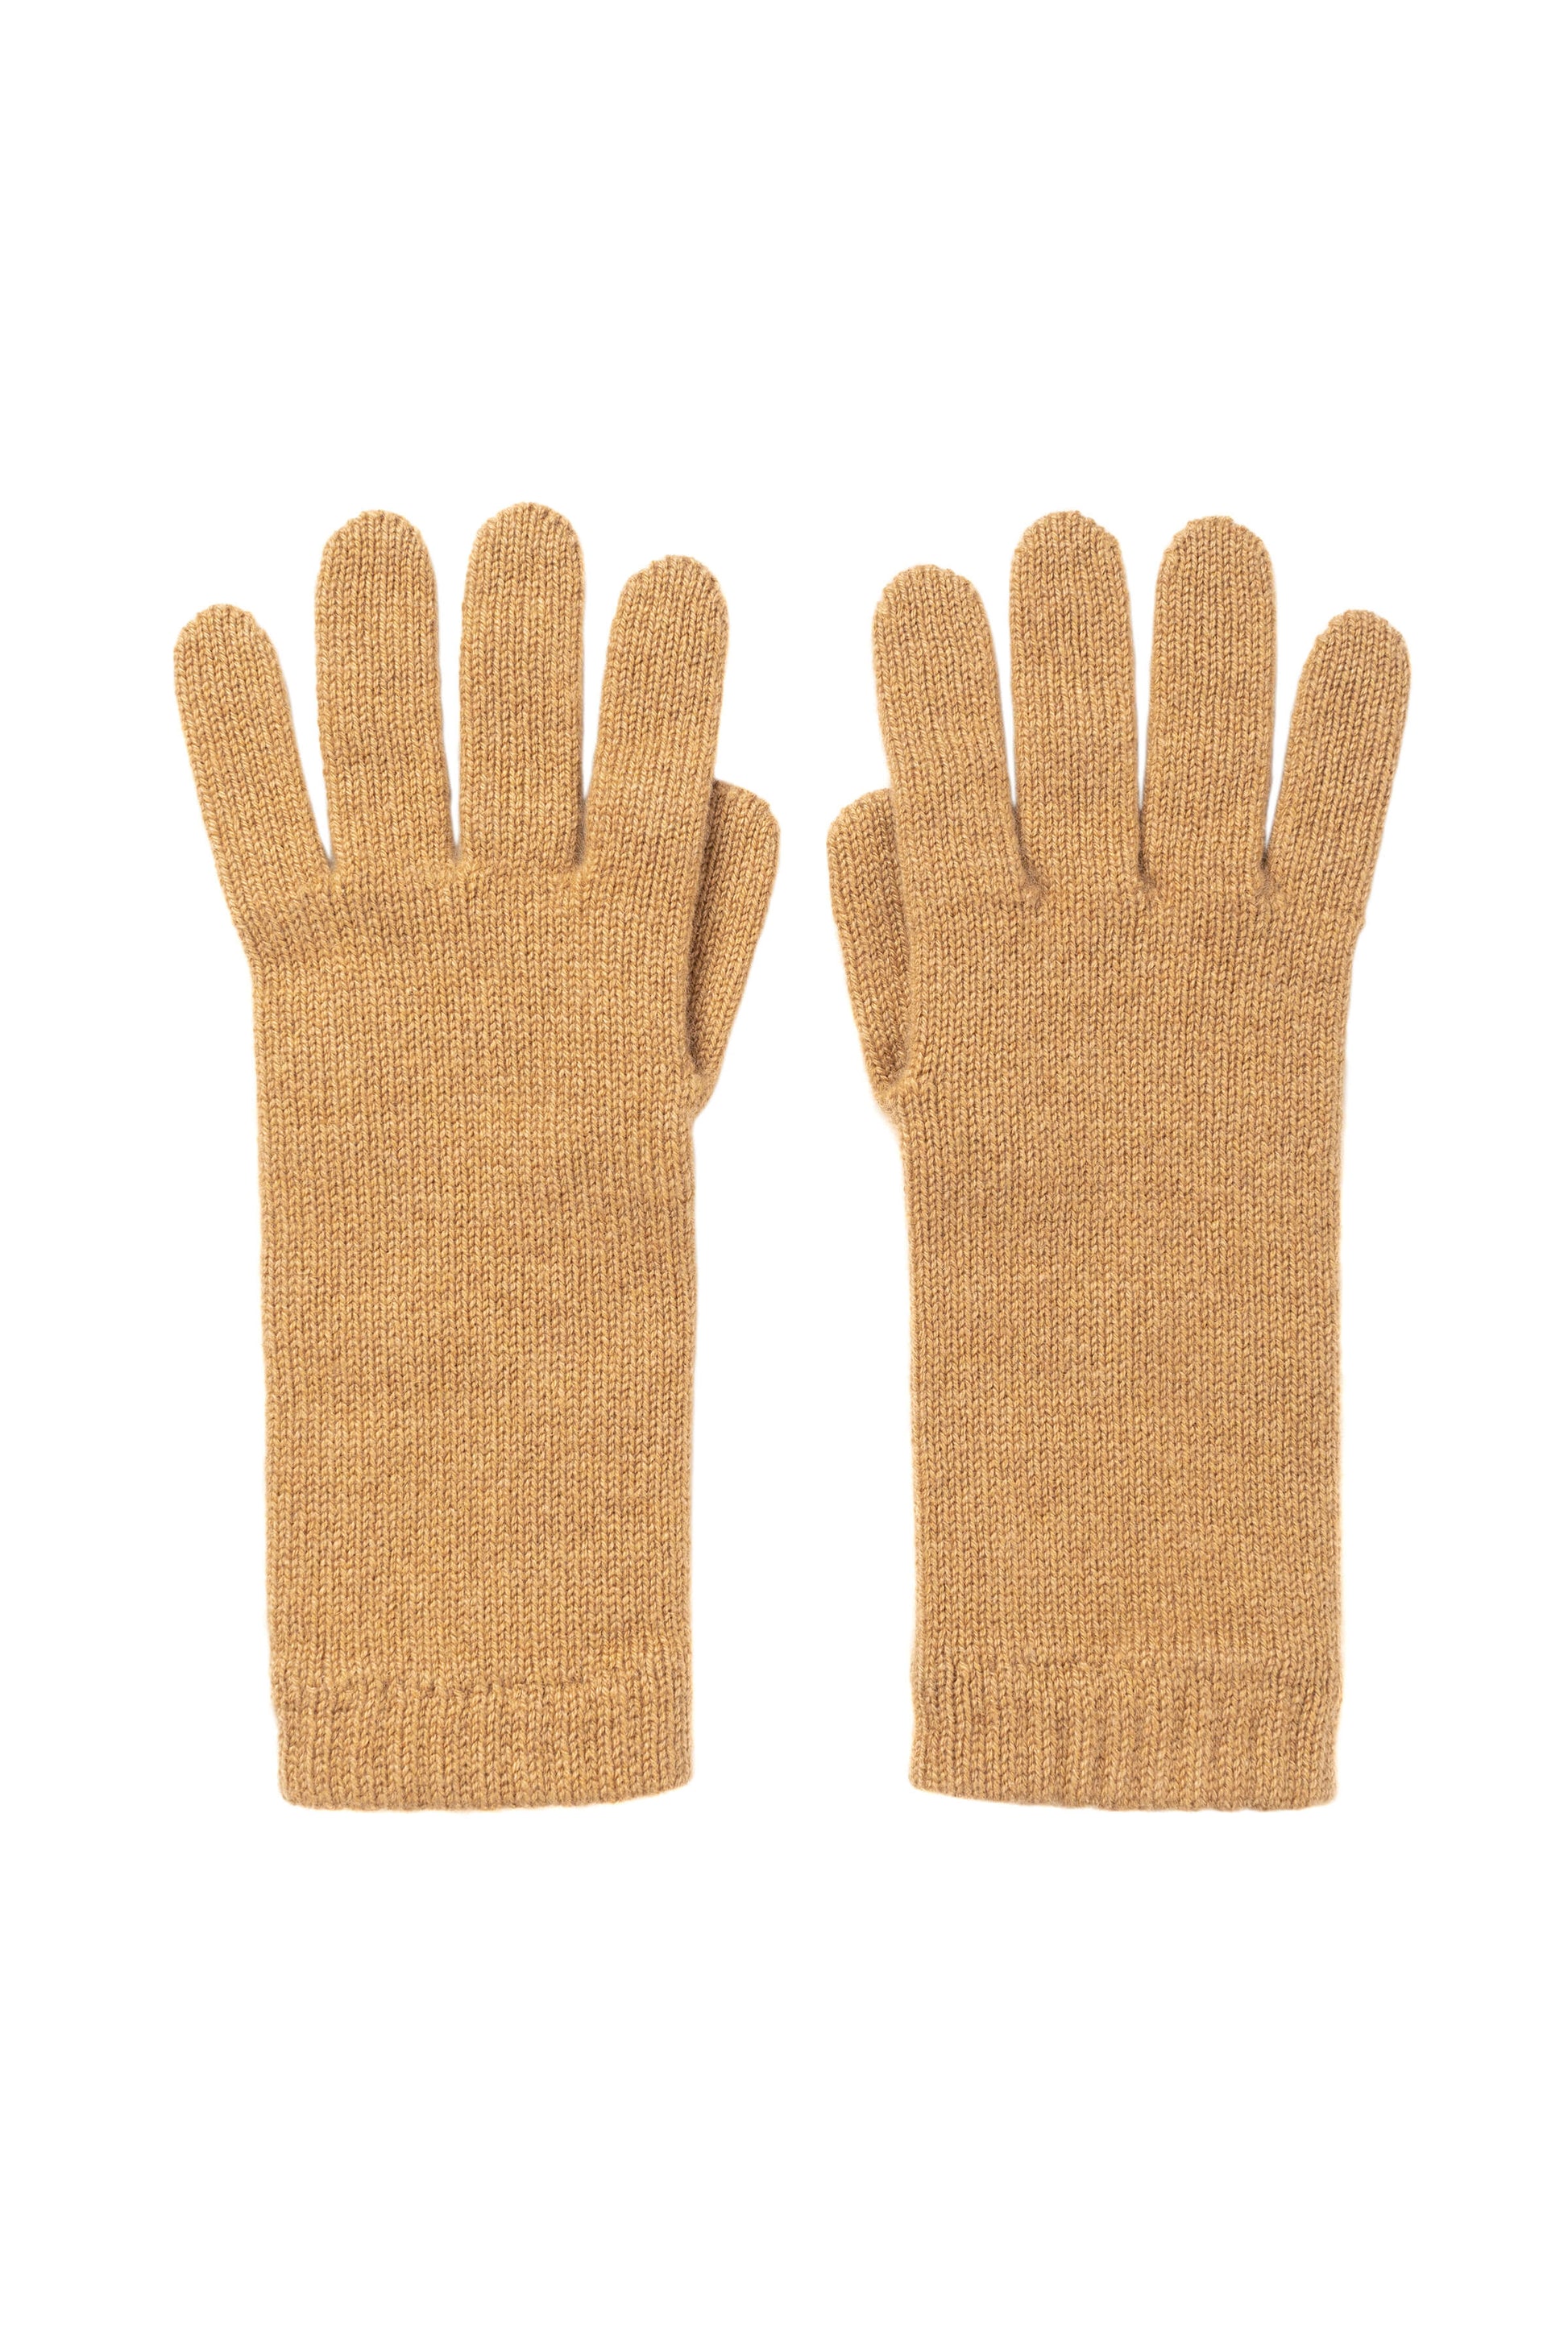 Johnstons of Elgin AW24 Knitted Accessory Camel Women's Cashmere Gloves HAD03226HB4315ONE